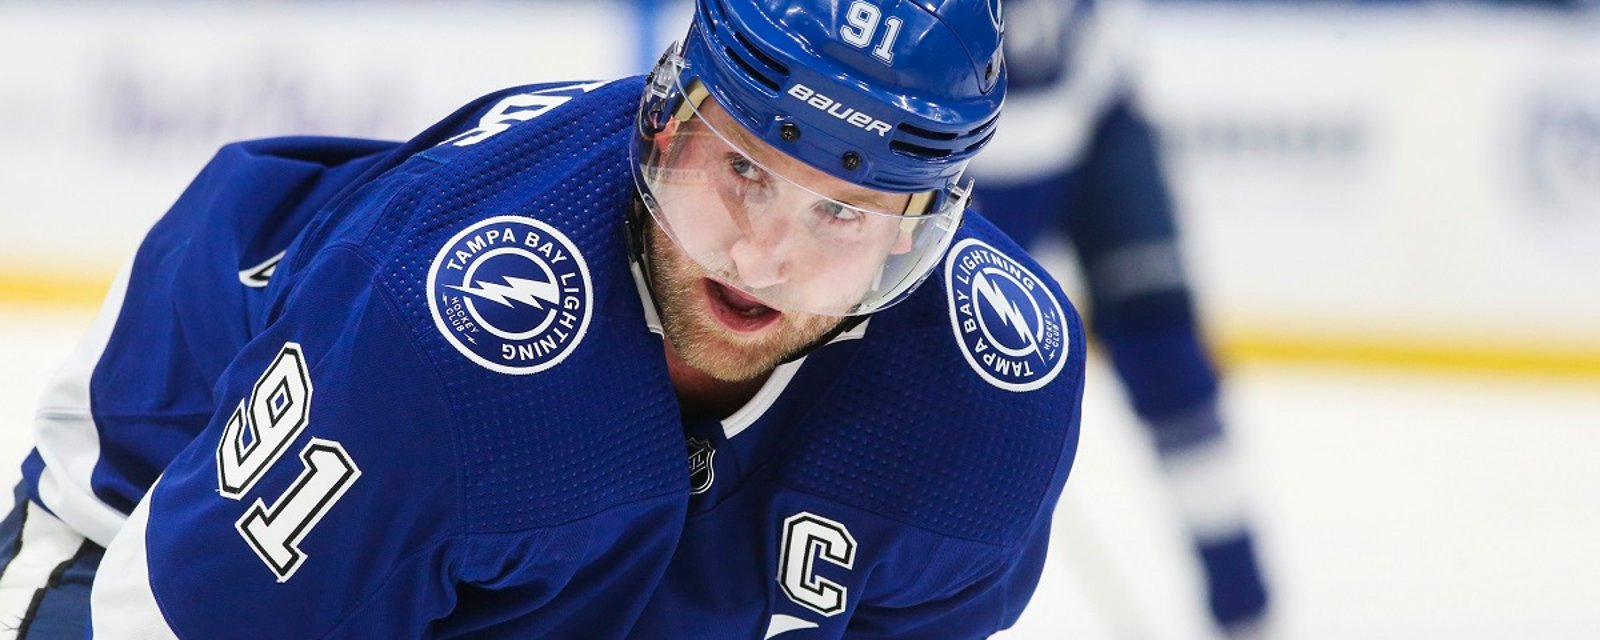 Radio host threatens to “obliterate” the Tampa Bay Lightning.